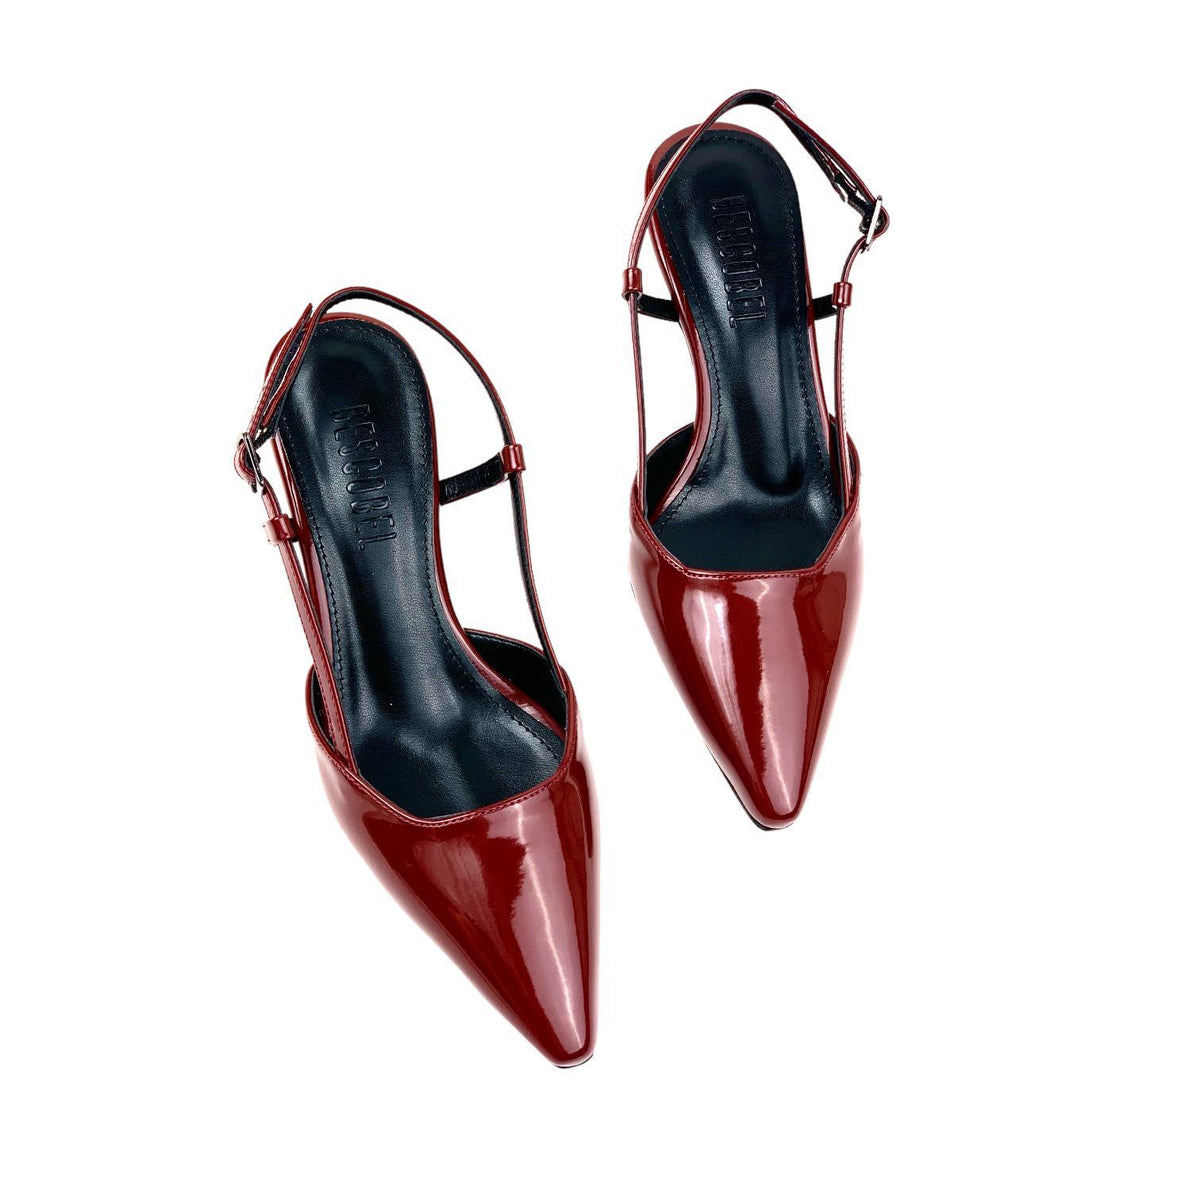 Women's Sedj Burgundy Patent Leather Material Open Back Almond Heel Shoes 5.5 Cm - STREETMODE™